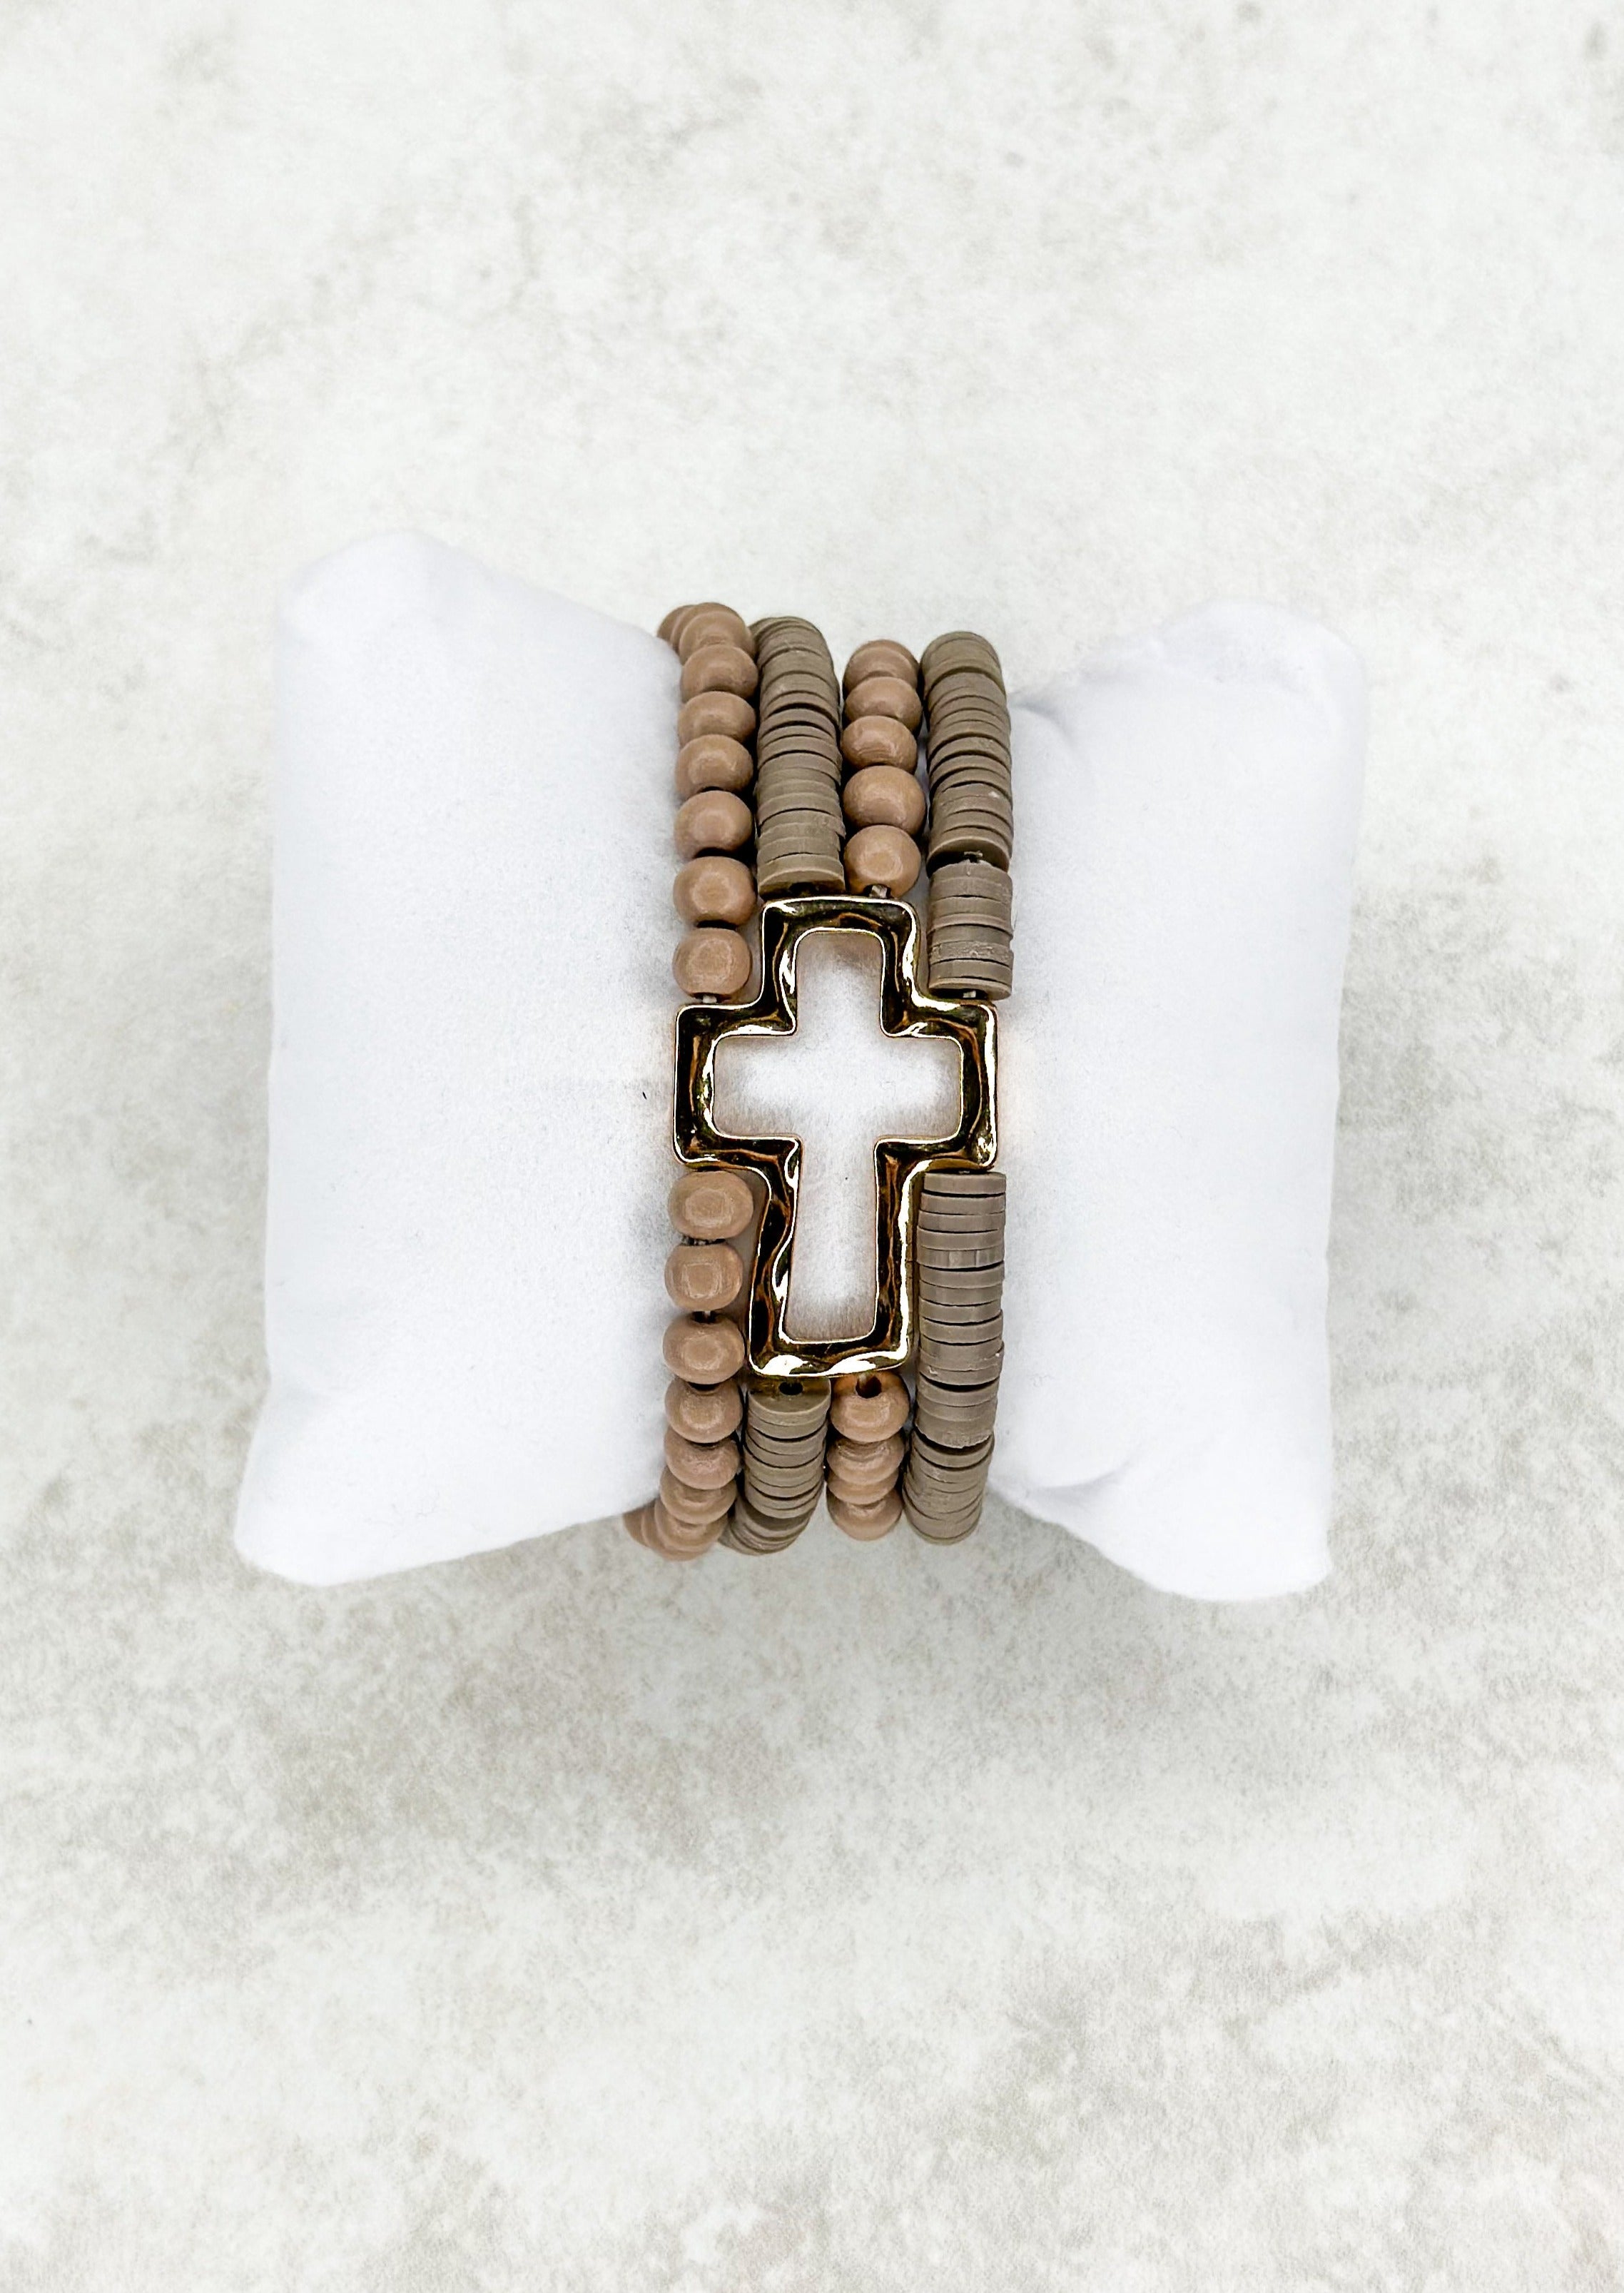 Four strand brown beaded stretch bracelet attached to open gold cross.